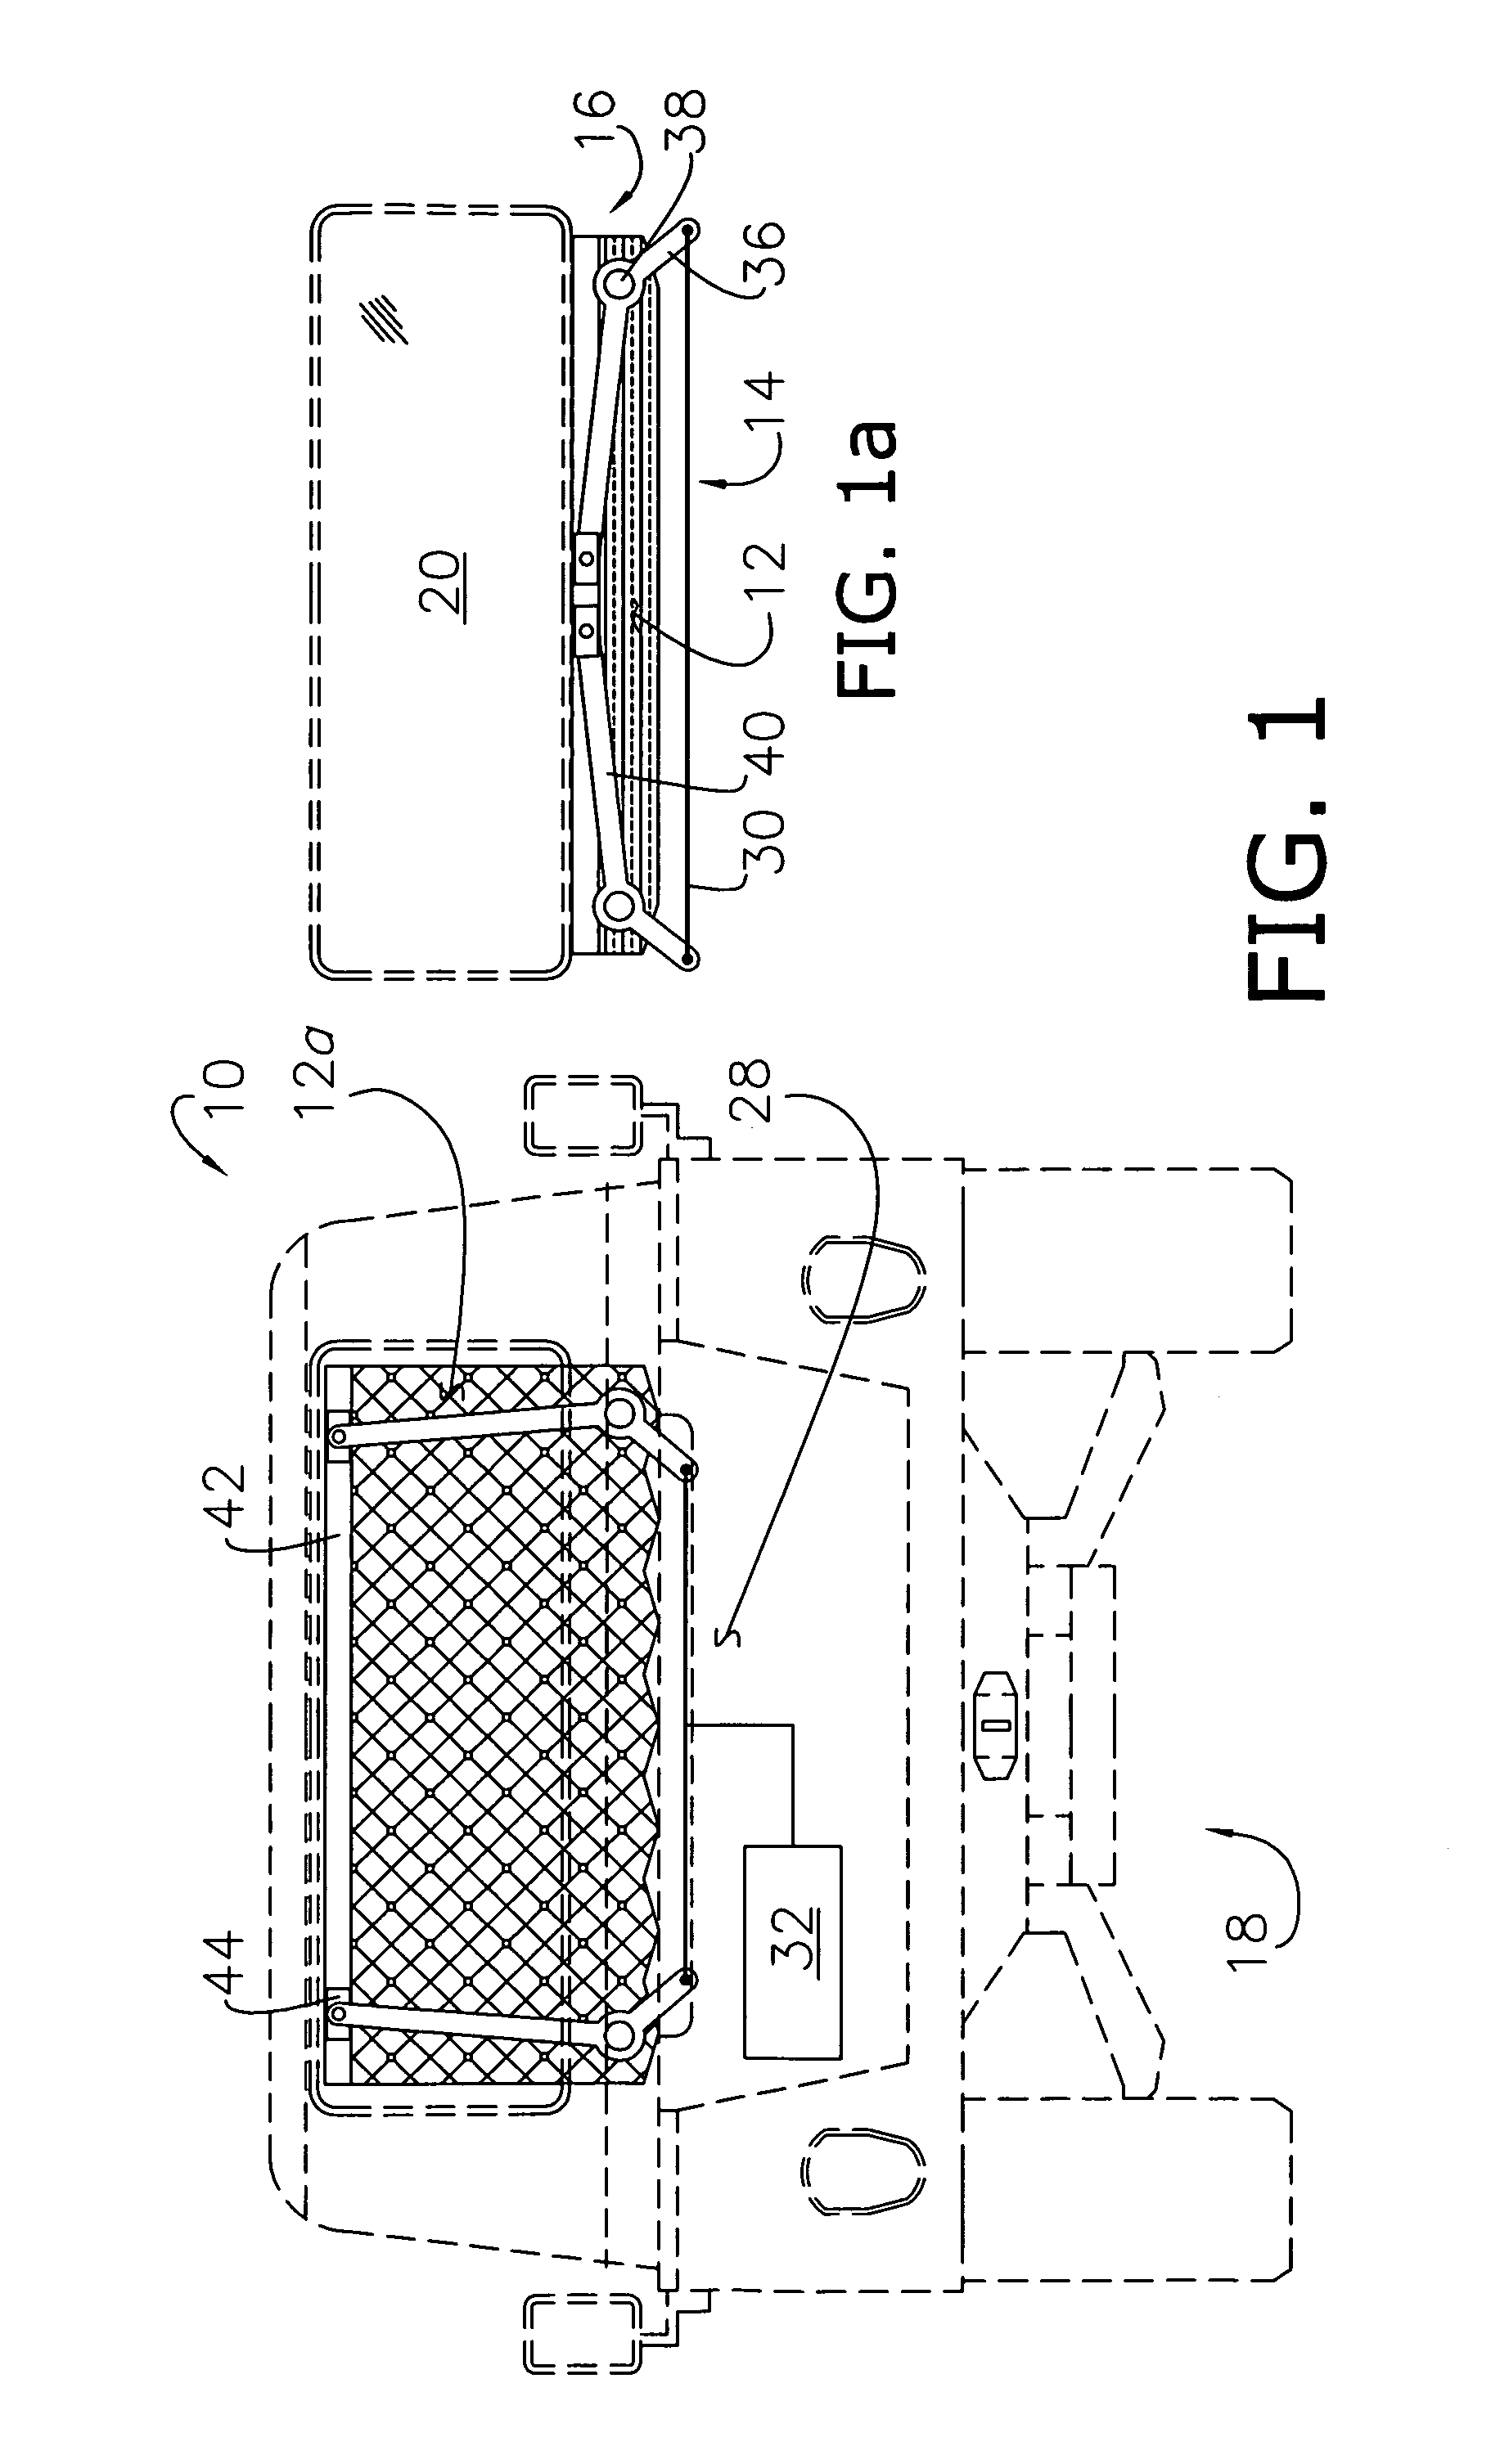 Cover deploying system utilizing active material actuation